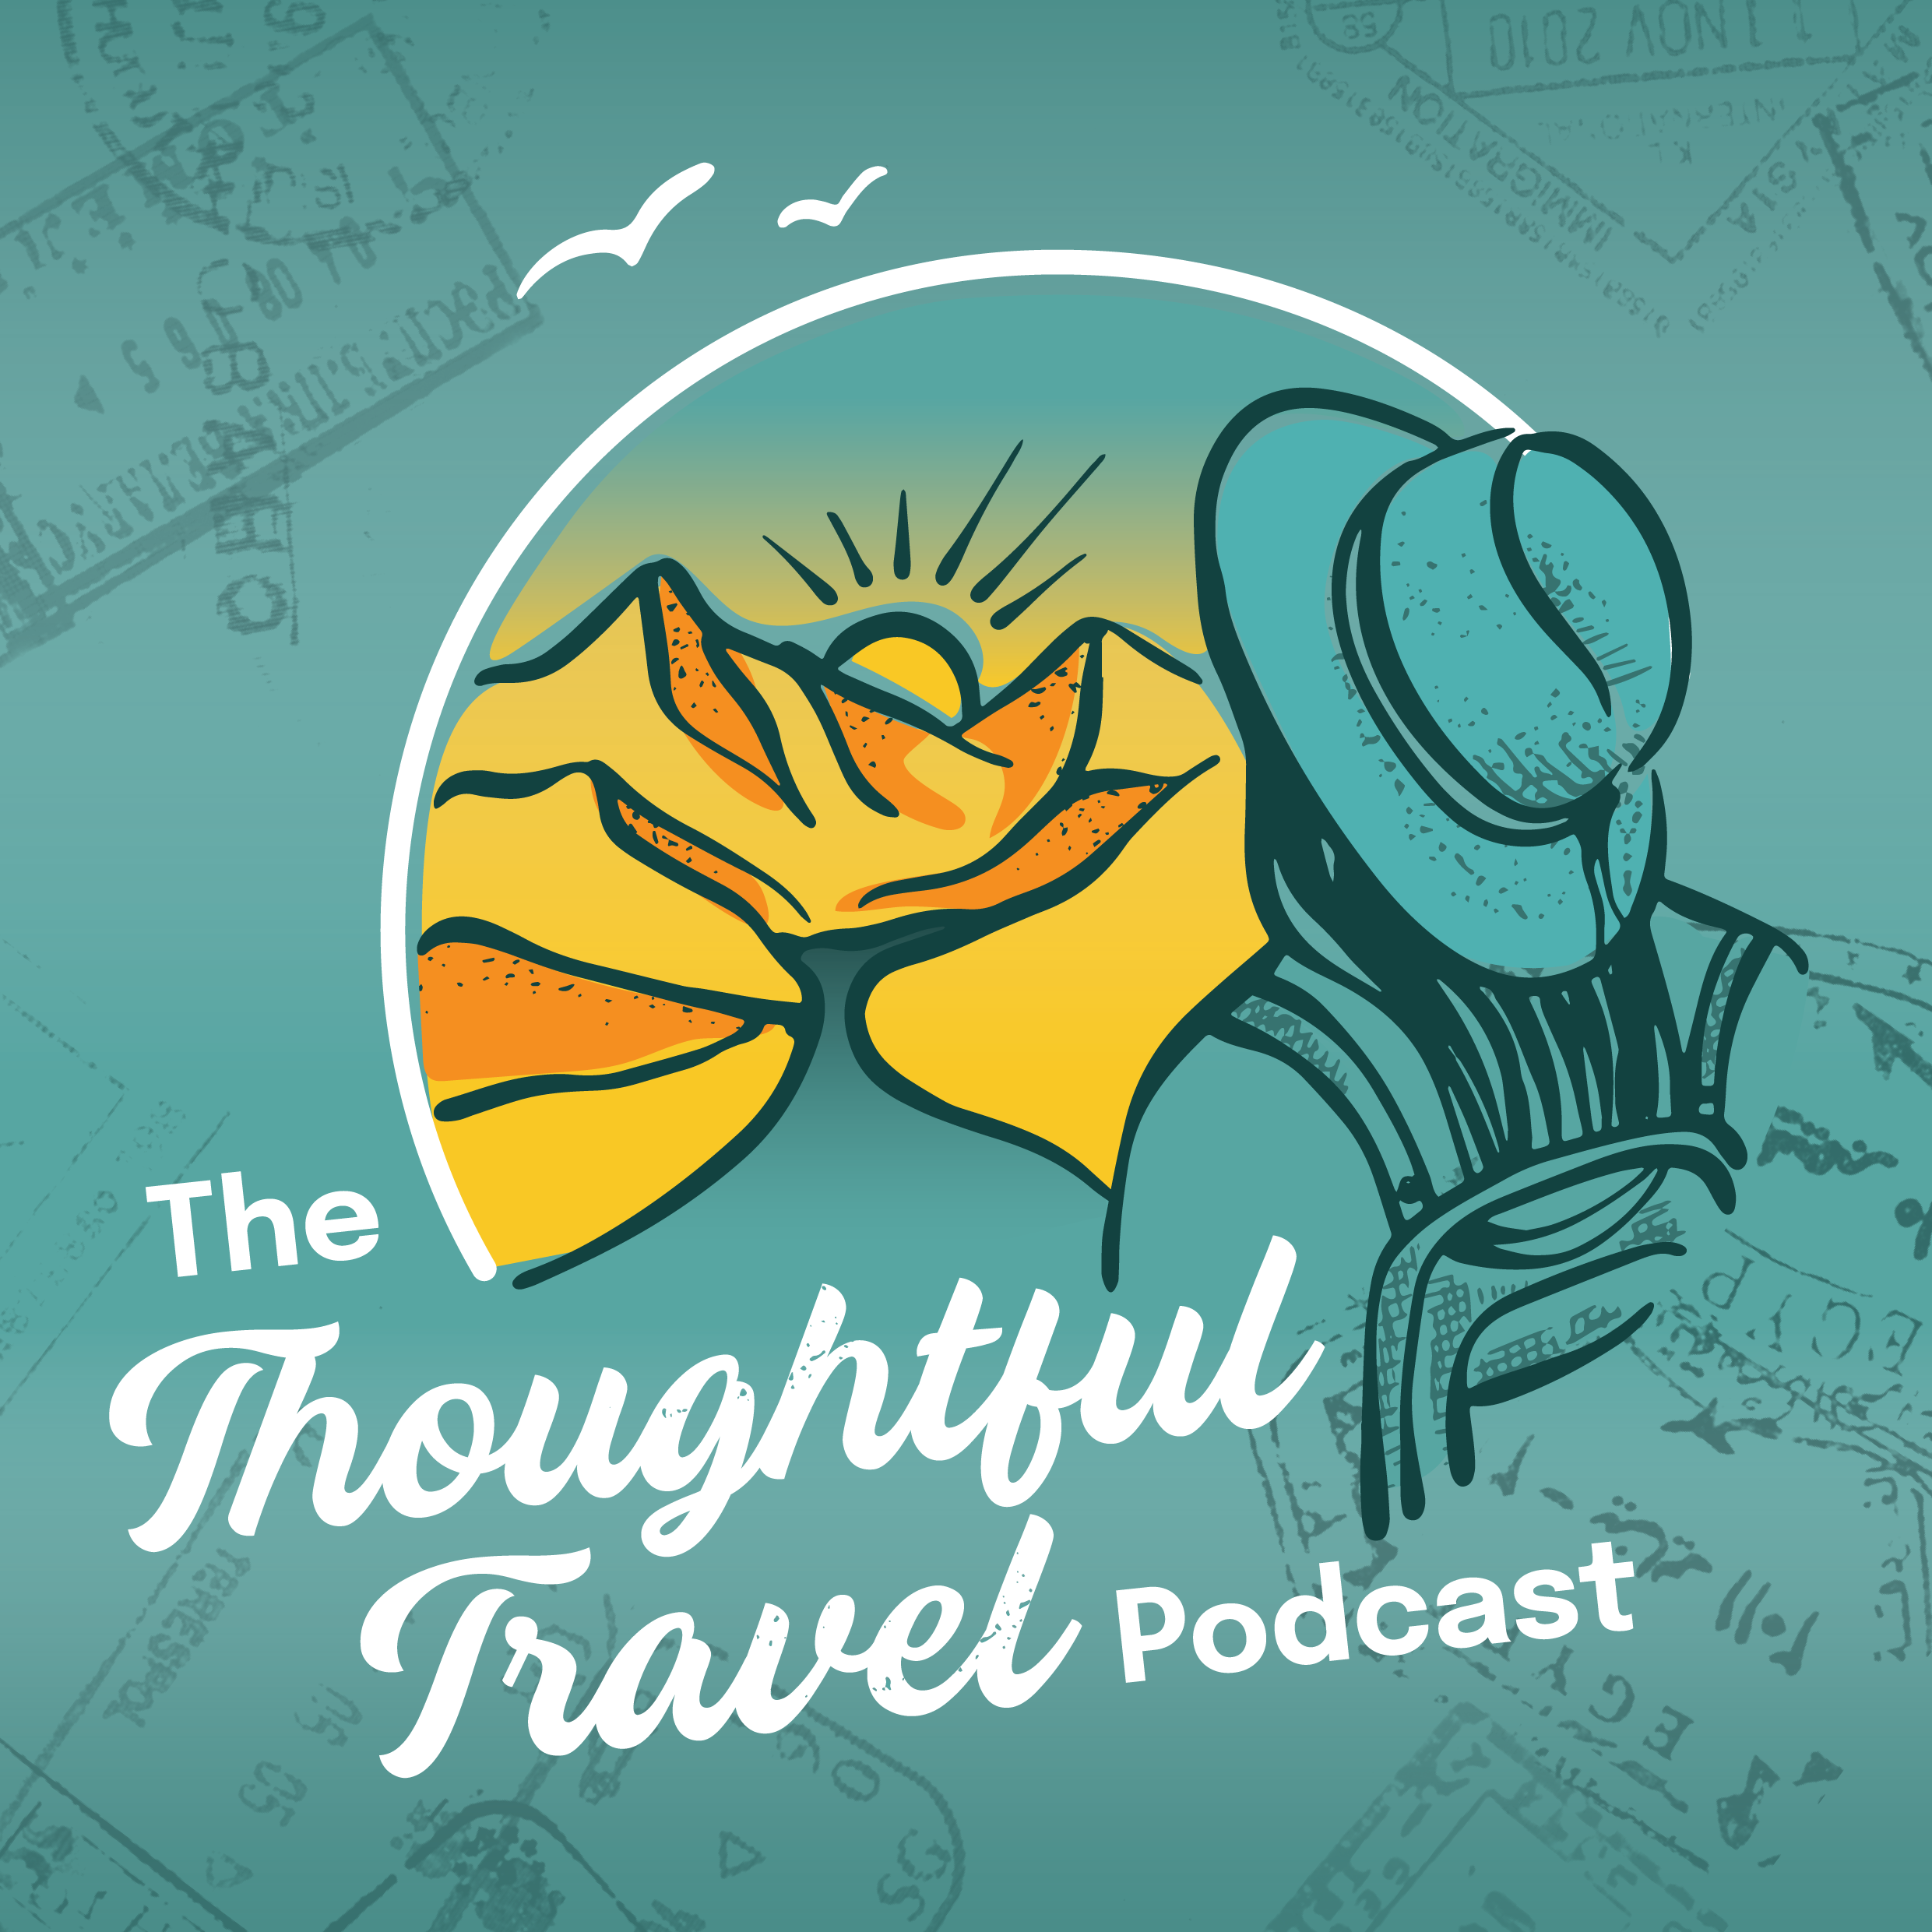 257 Travel Writing World x The Thoughtful Travel Podcast